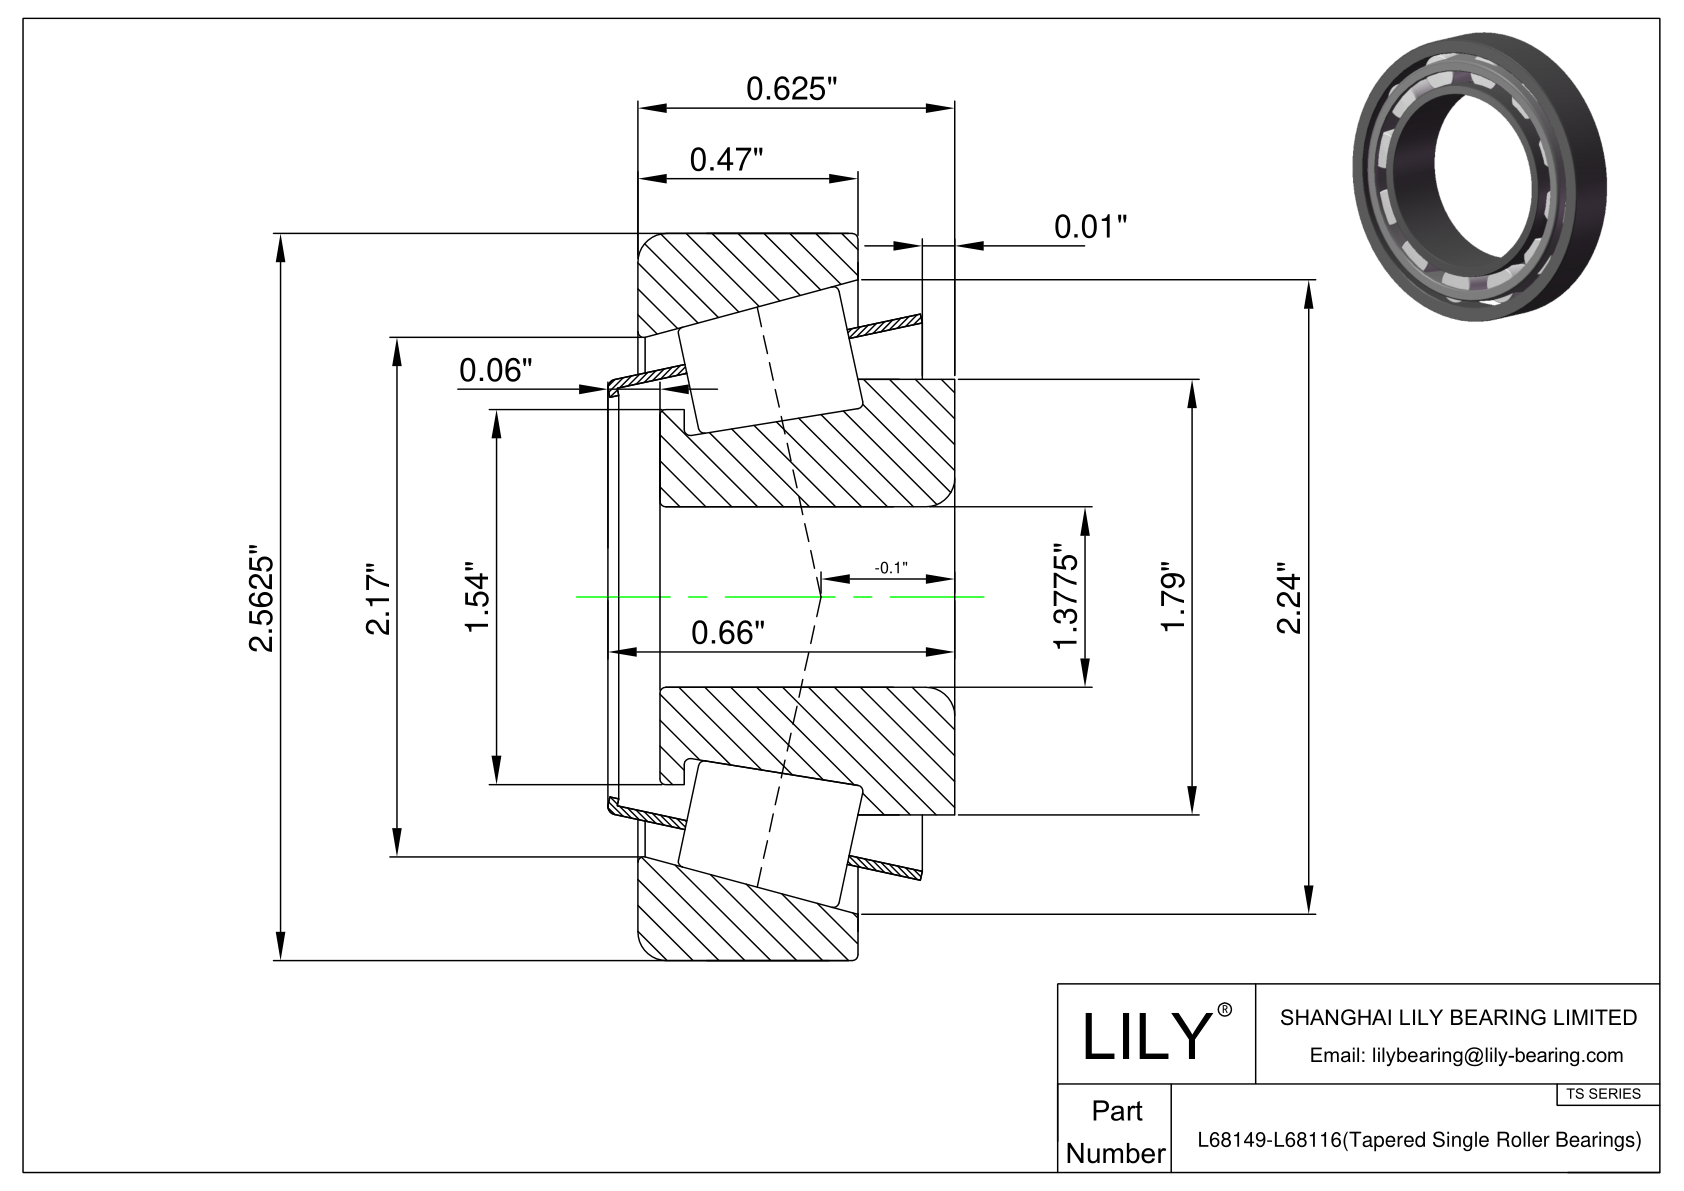 L68149-L68116 TS (Tapered Single Roller Bearings) (Imperial) cad drawing